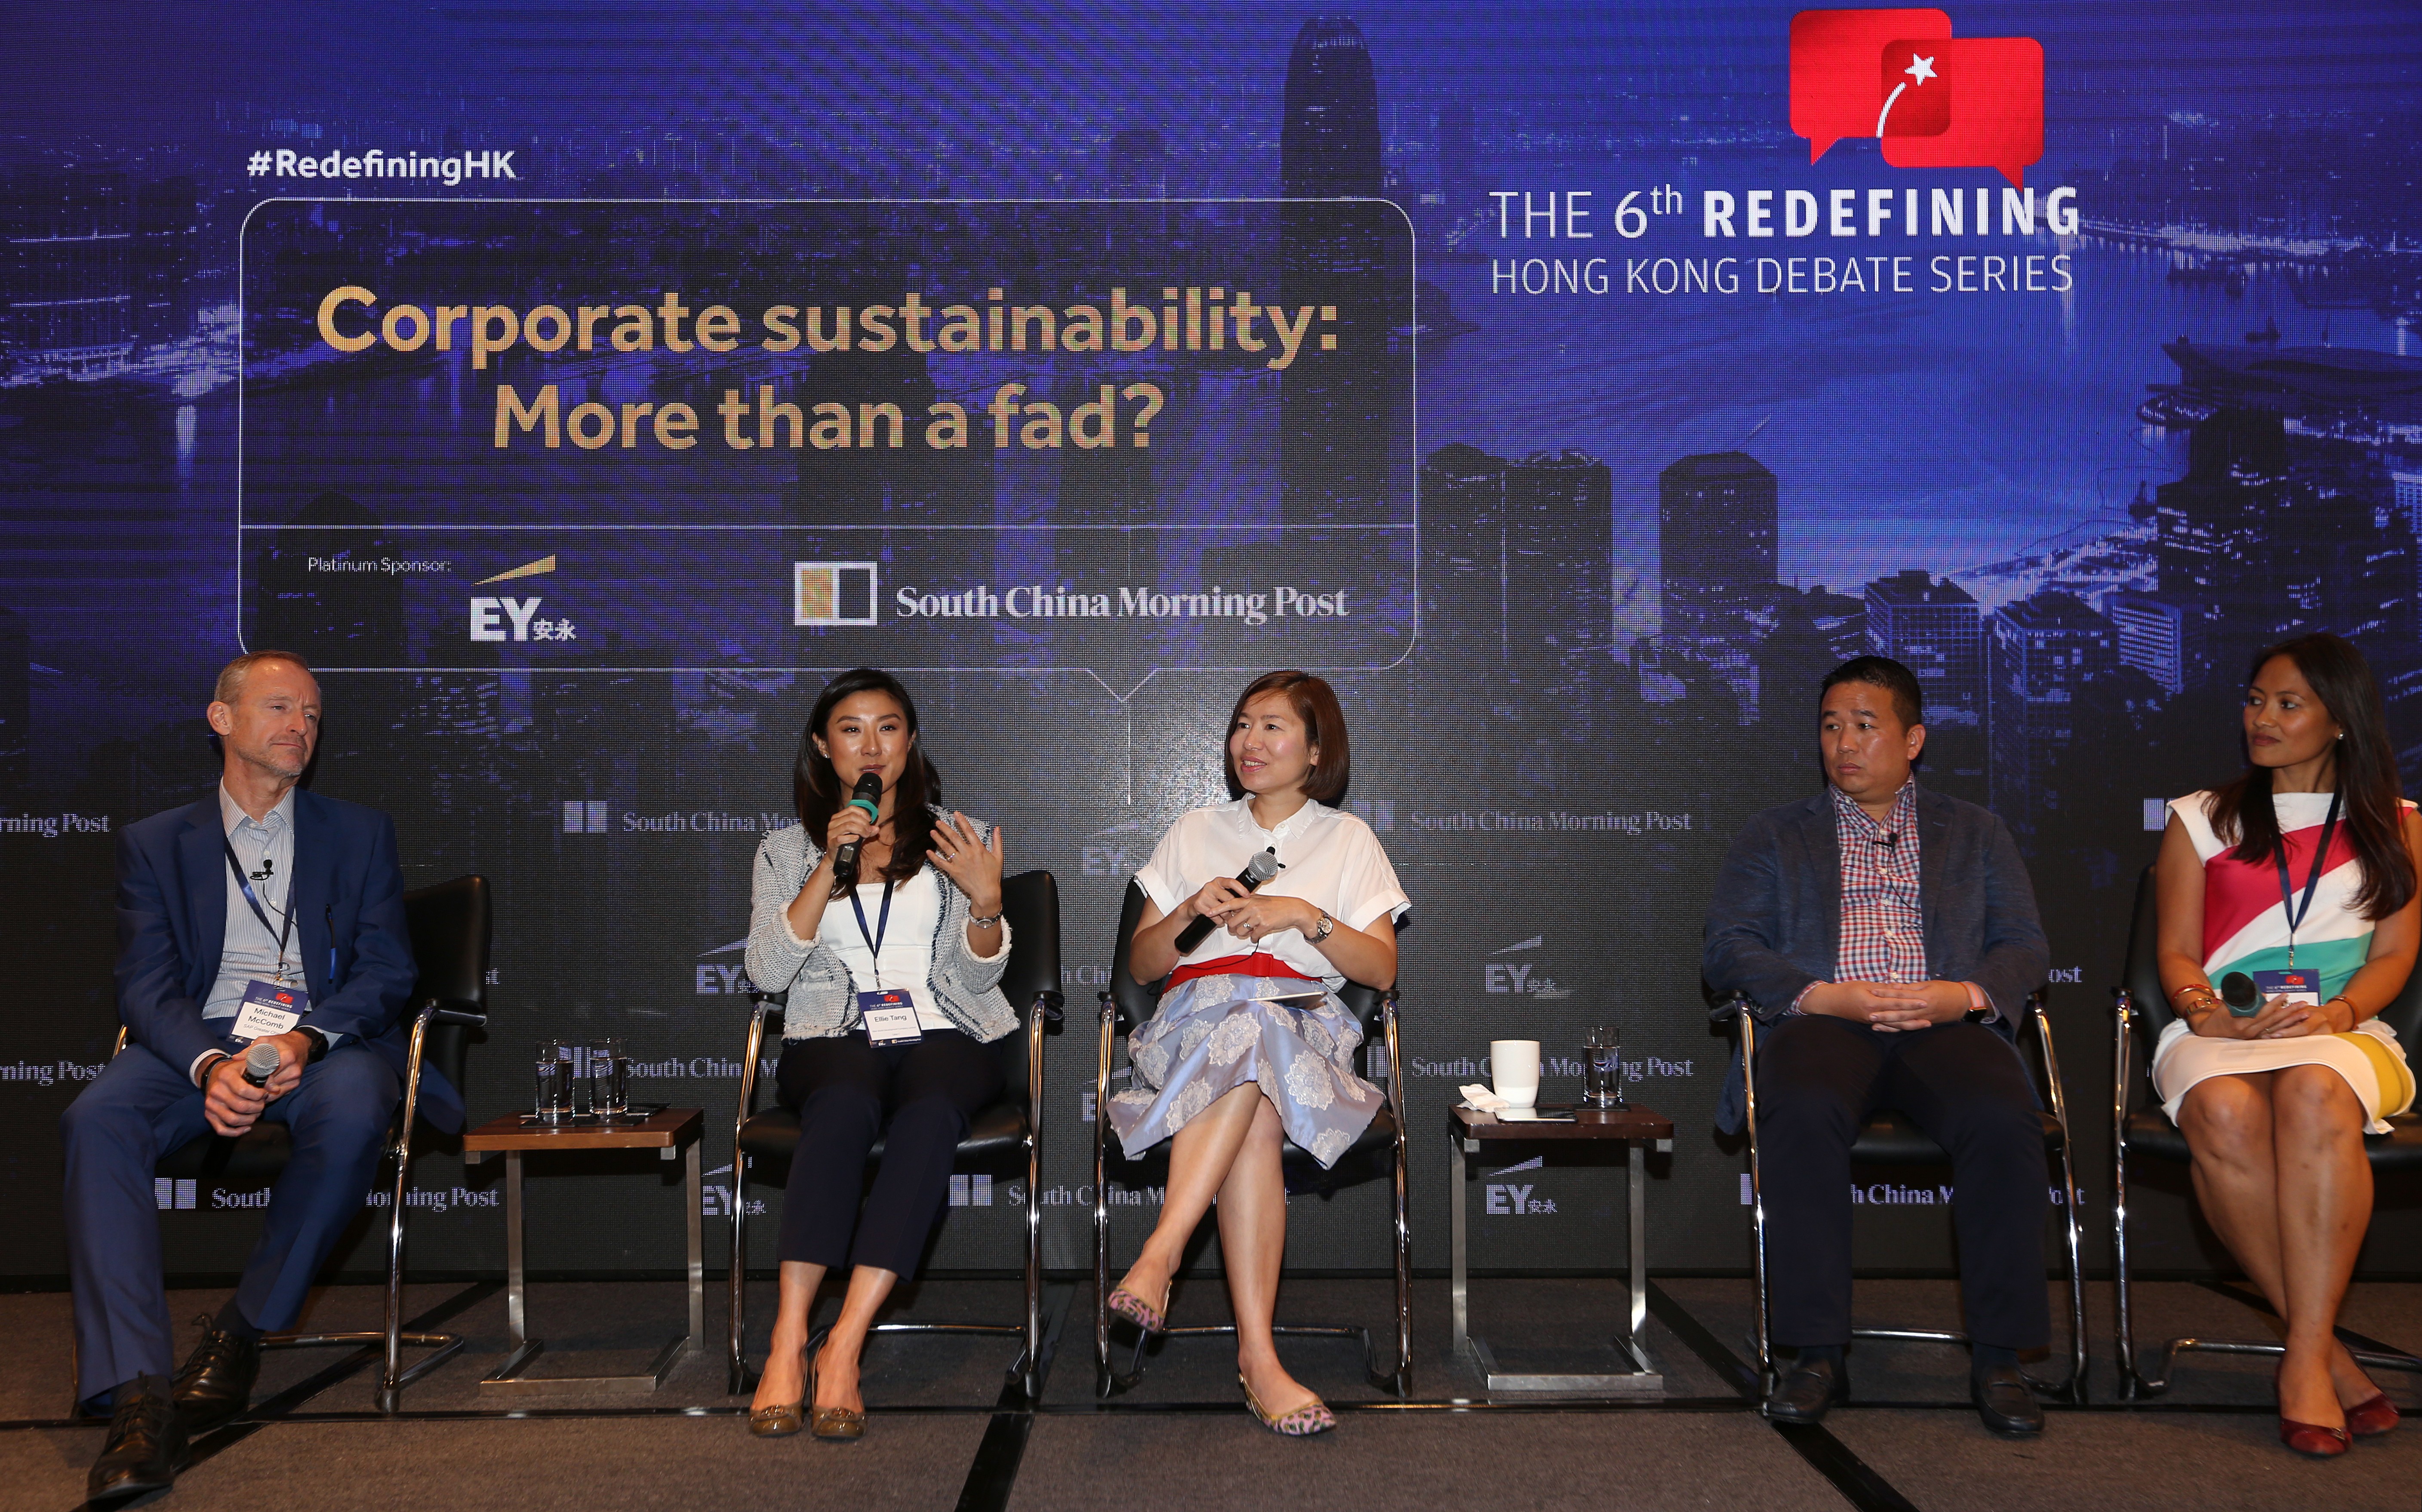 (Left to right): Michael McComb, vice president for communications and sustainability at SAP Greater China; Ellie Tang, head of sustainability at New World Development; Denise Tsang, Hong Kong News Editor, South China Morning Post; Roger Lee, CEO of TAL Group; and Pat Dwyer, founder of The Purpose Business, attend the Redefining Hong Kong Debate Series – Corporate Sustainability, at the JW Marriott Hotel in Admiralty on Tuesday. Photo: Xiaomei Chen